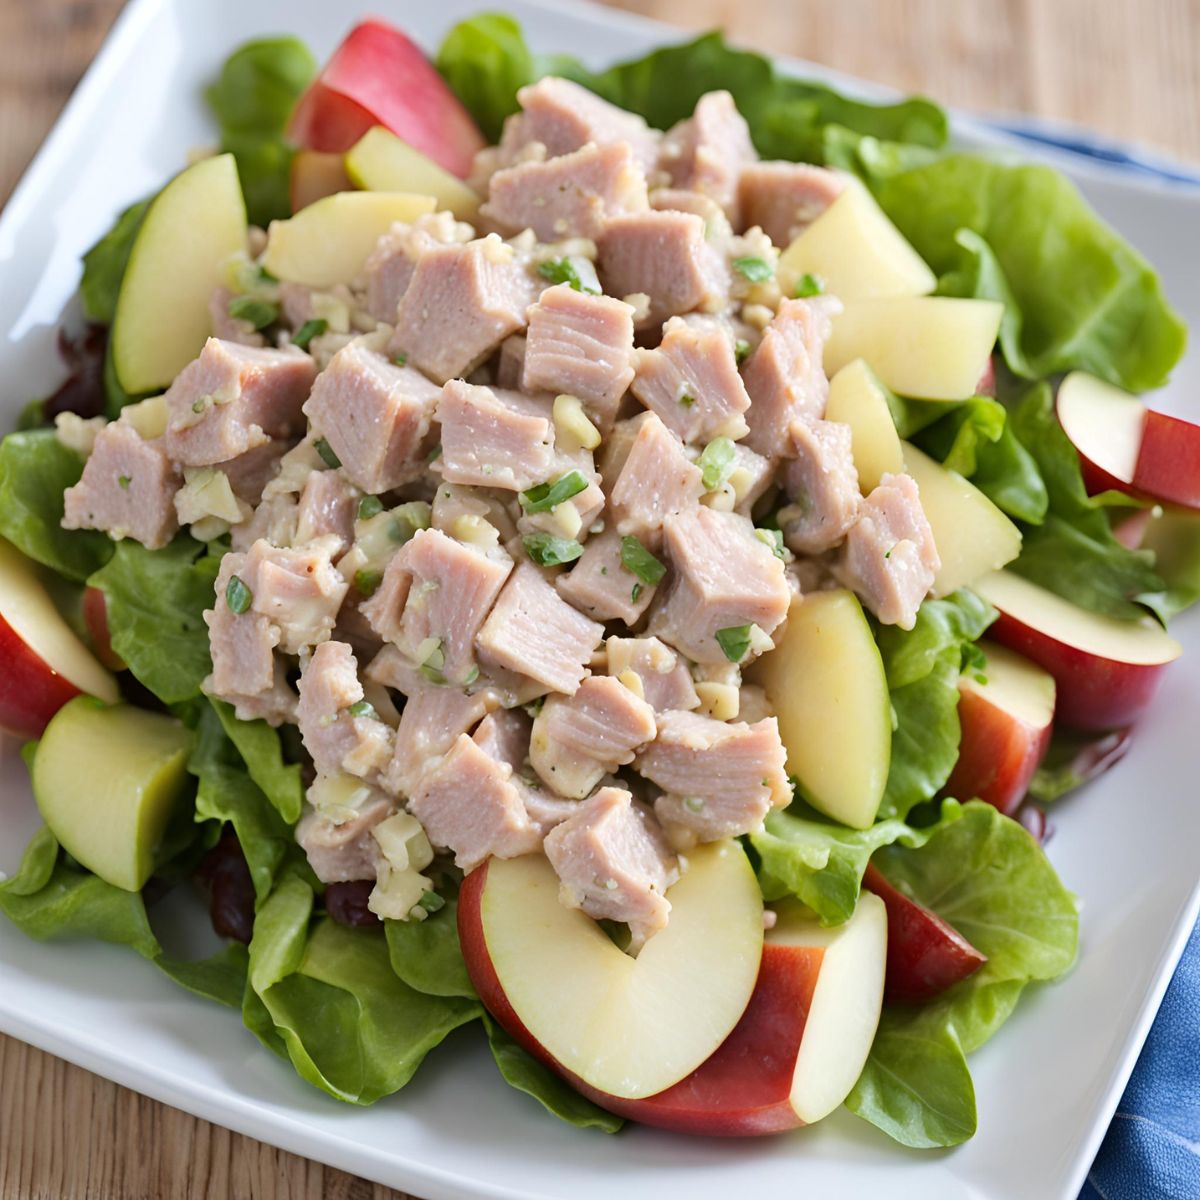 Tuna Salad With Apples Recipe: Quick and Tasty!